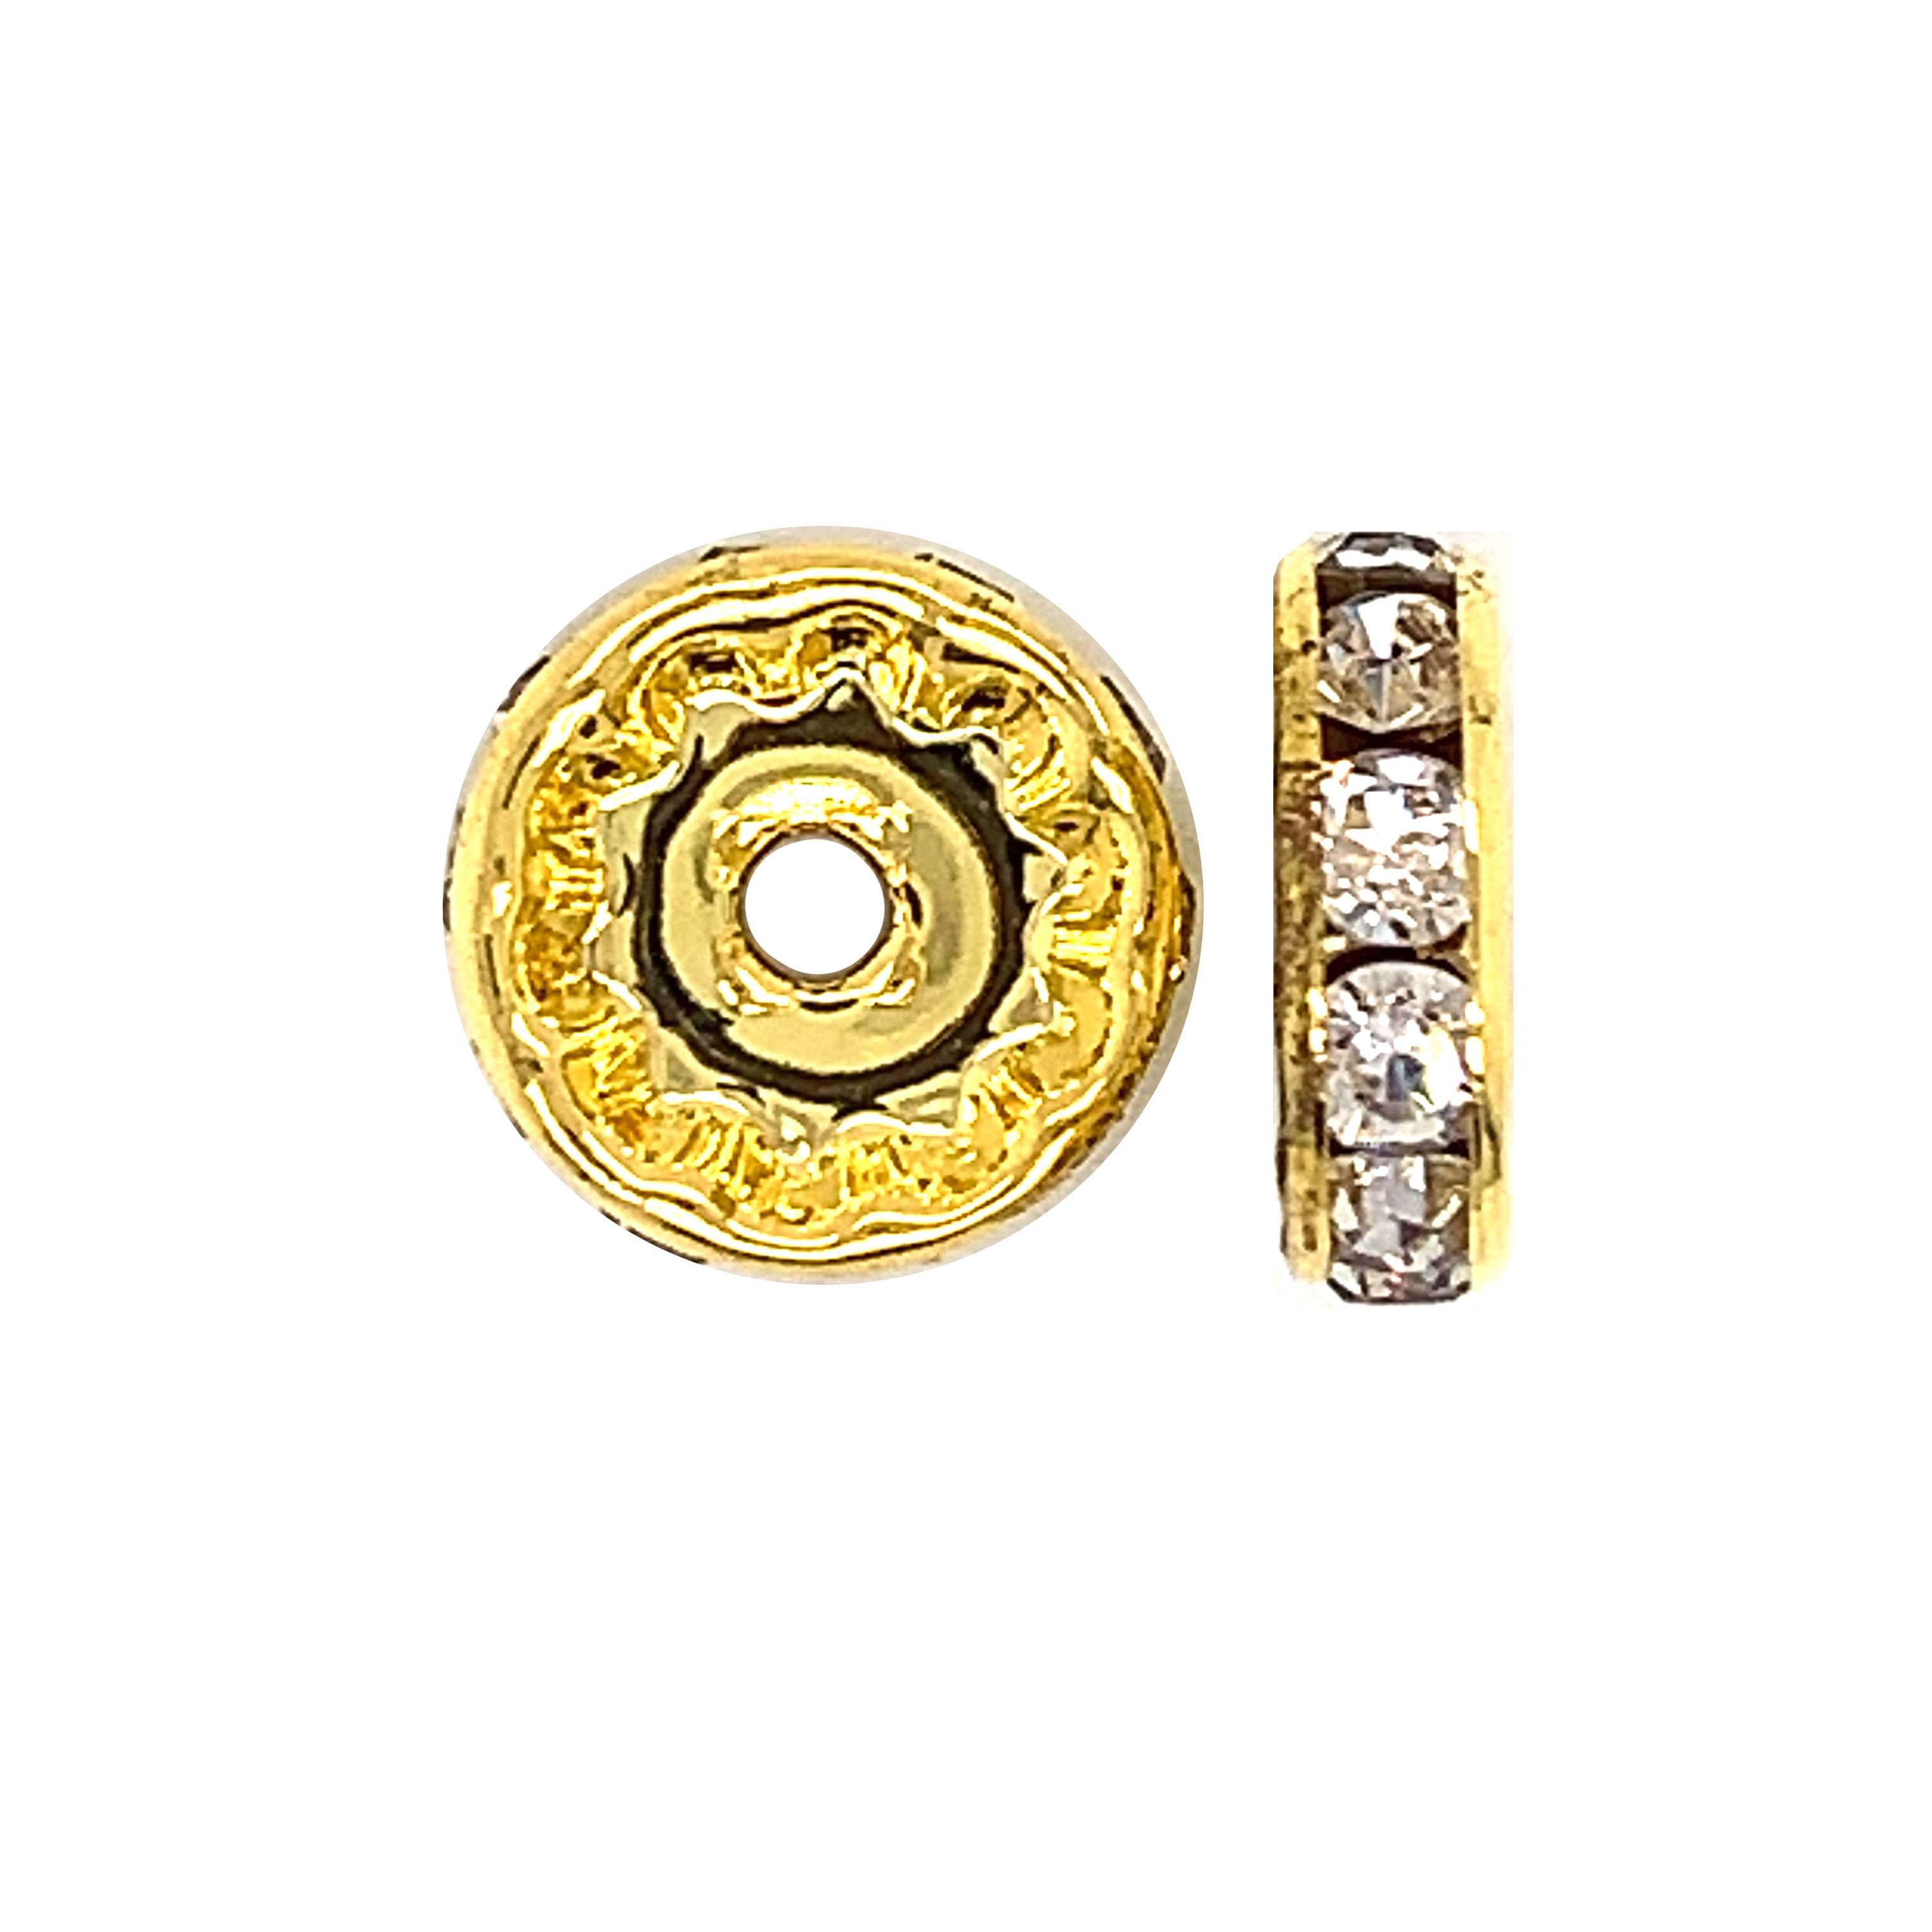 CZ 12mm Gold Tone Rondelle - Pack of 10